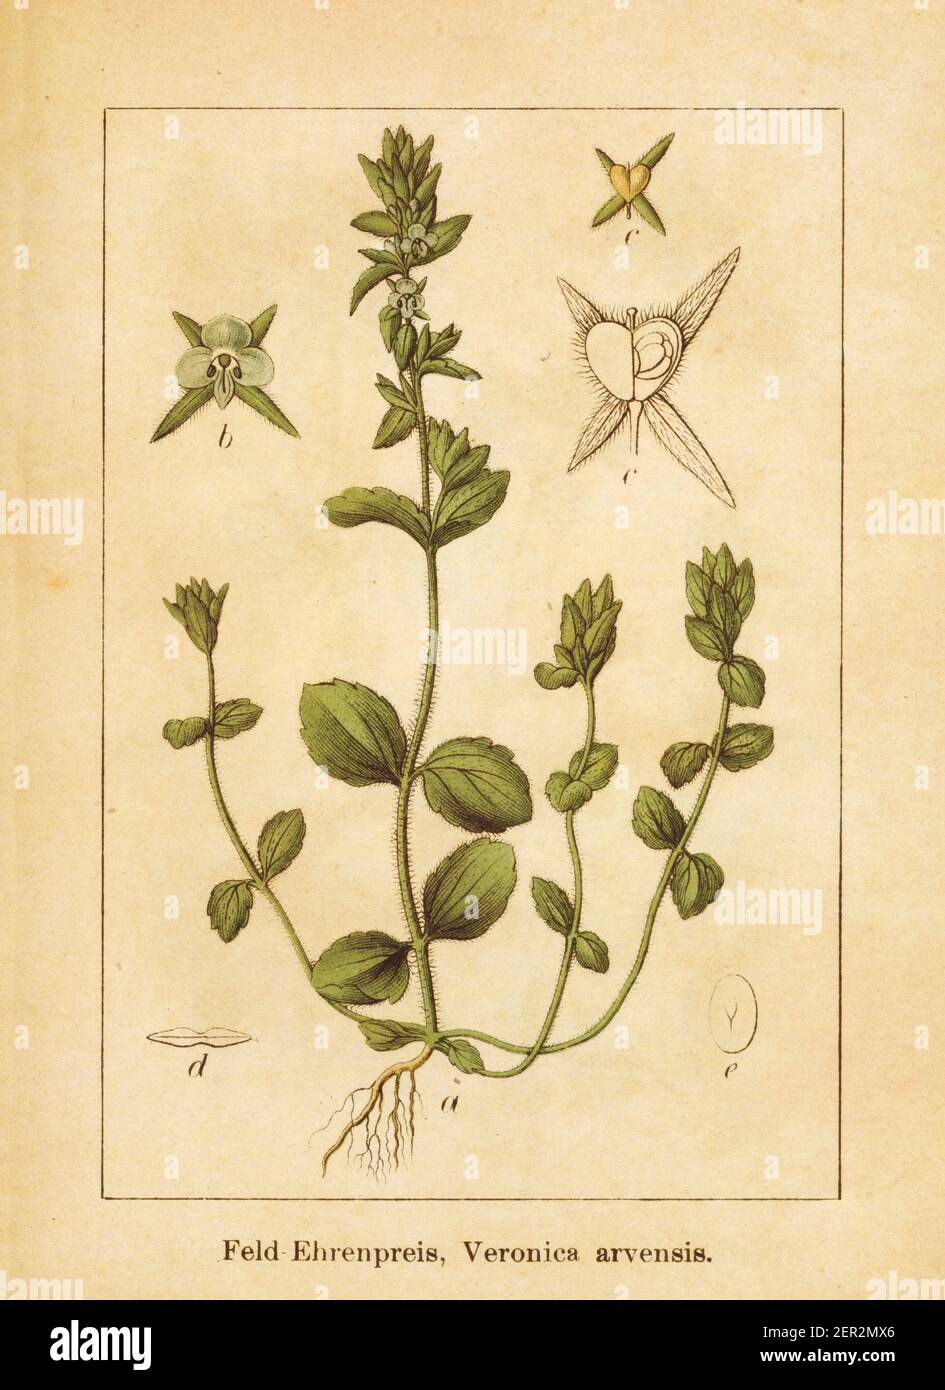 Antique illustration of a veronica arvensis, also known as corn speedwell, common speedwell, speedwell, rock speedwell or wall speedwell. Engraved by Stock Photo